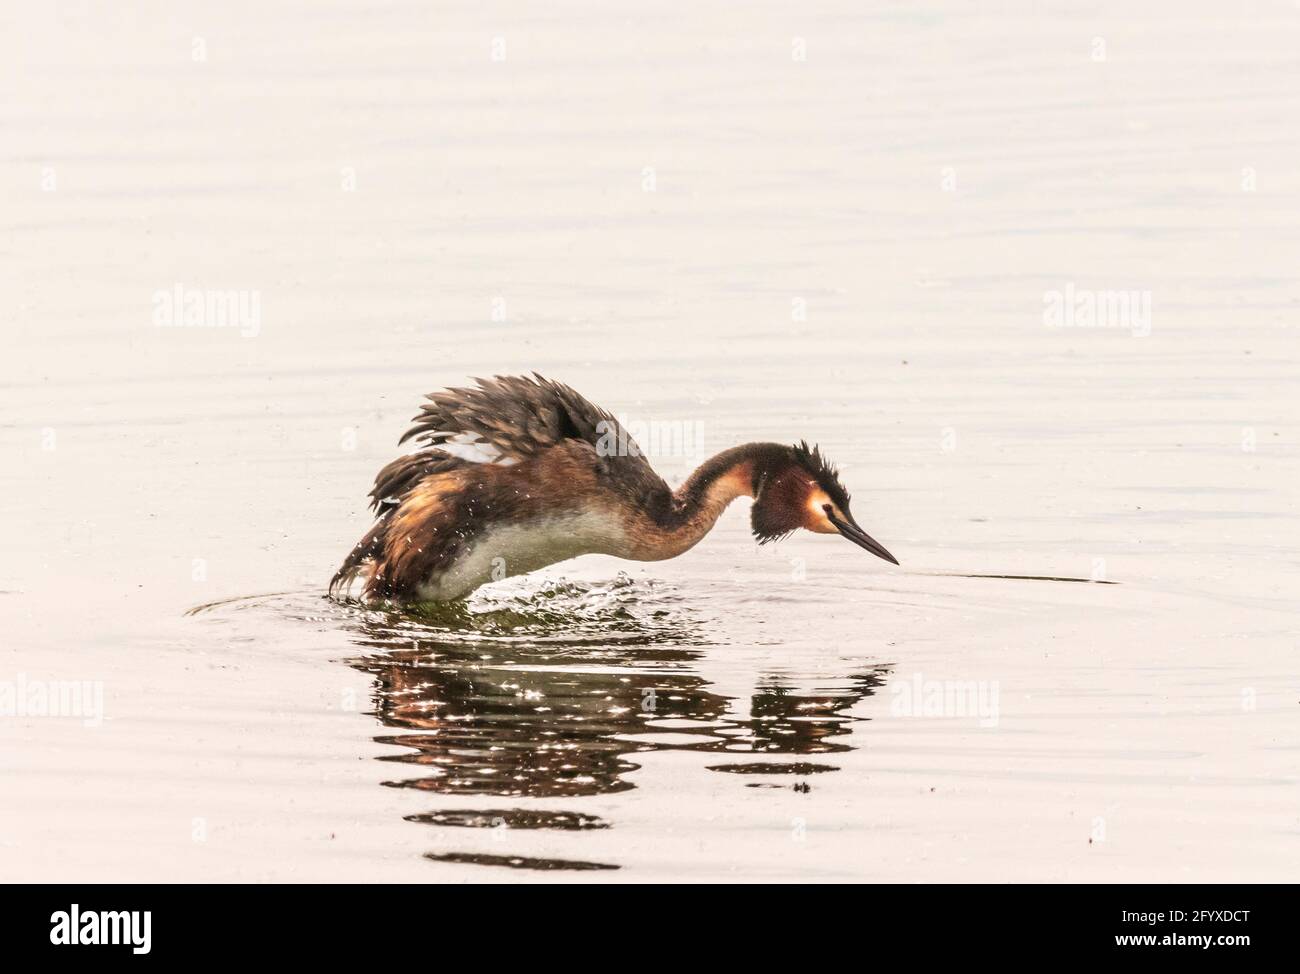 Nottingham 28 th May 2021::  Most photographed Crested grebes in England a breeding pair of Grebes have build the nest just feet away from the Richard Attenborough nature center , stunded onlookers watch from the center walk way.  : Clifford Norton Alamy Stock Photo